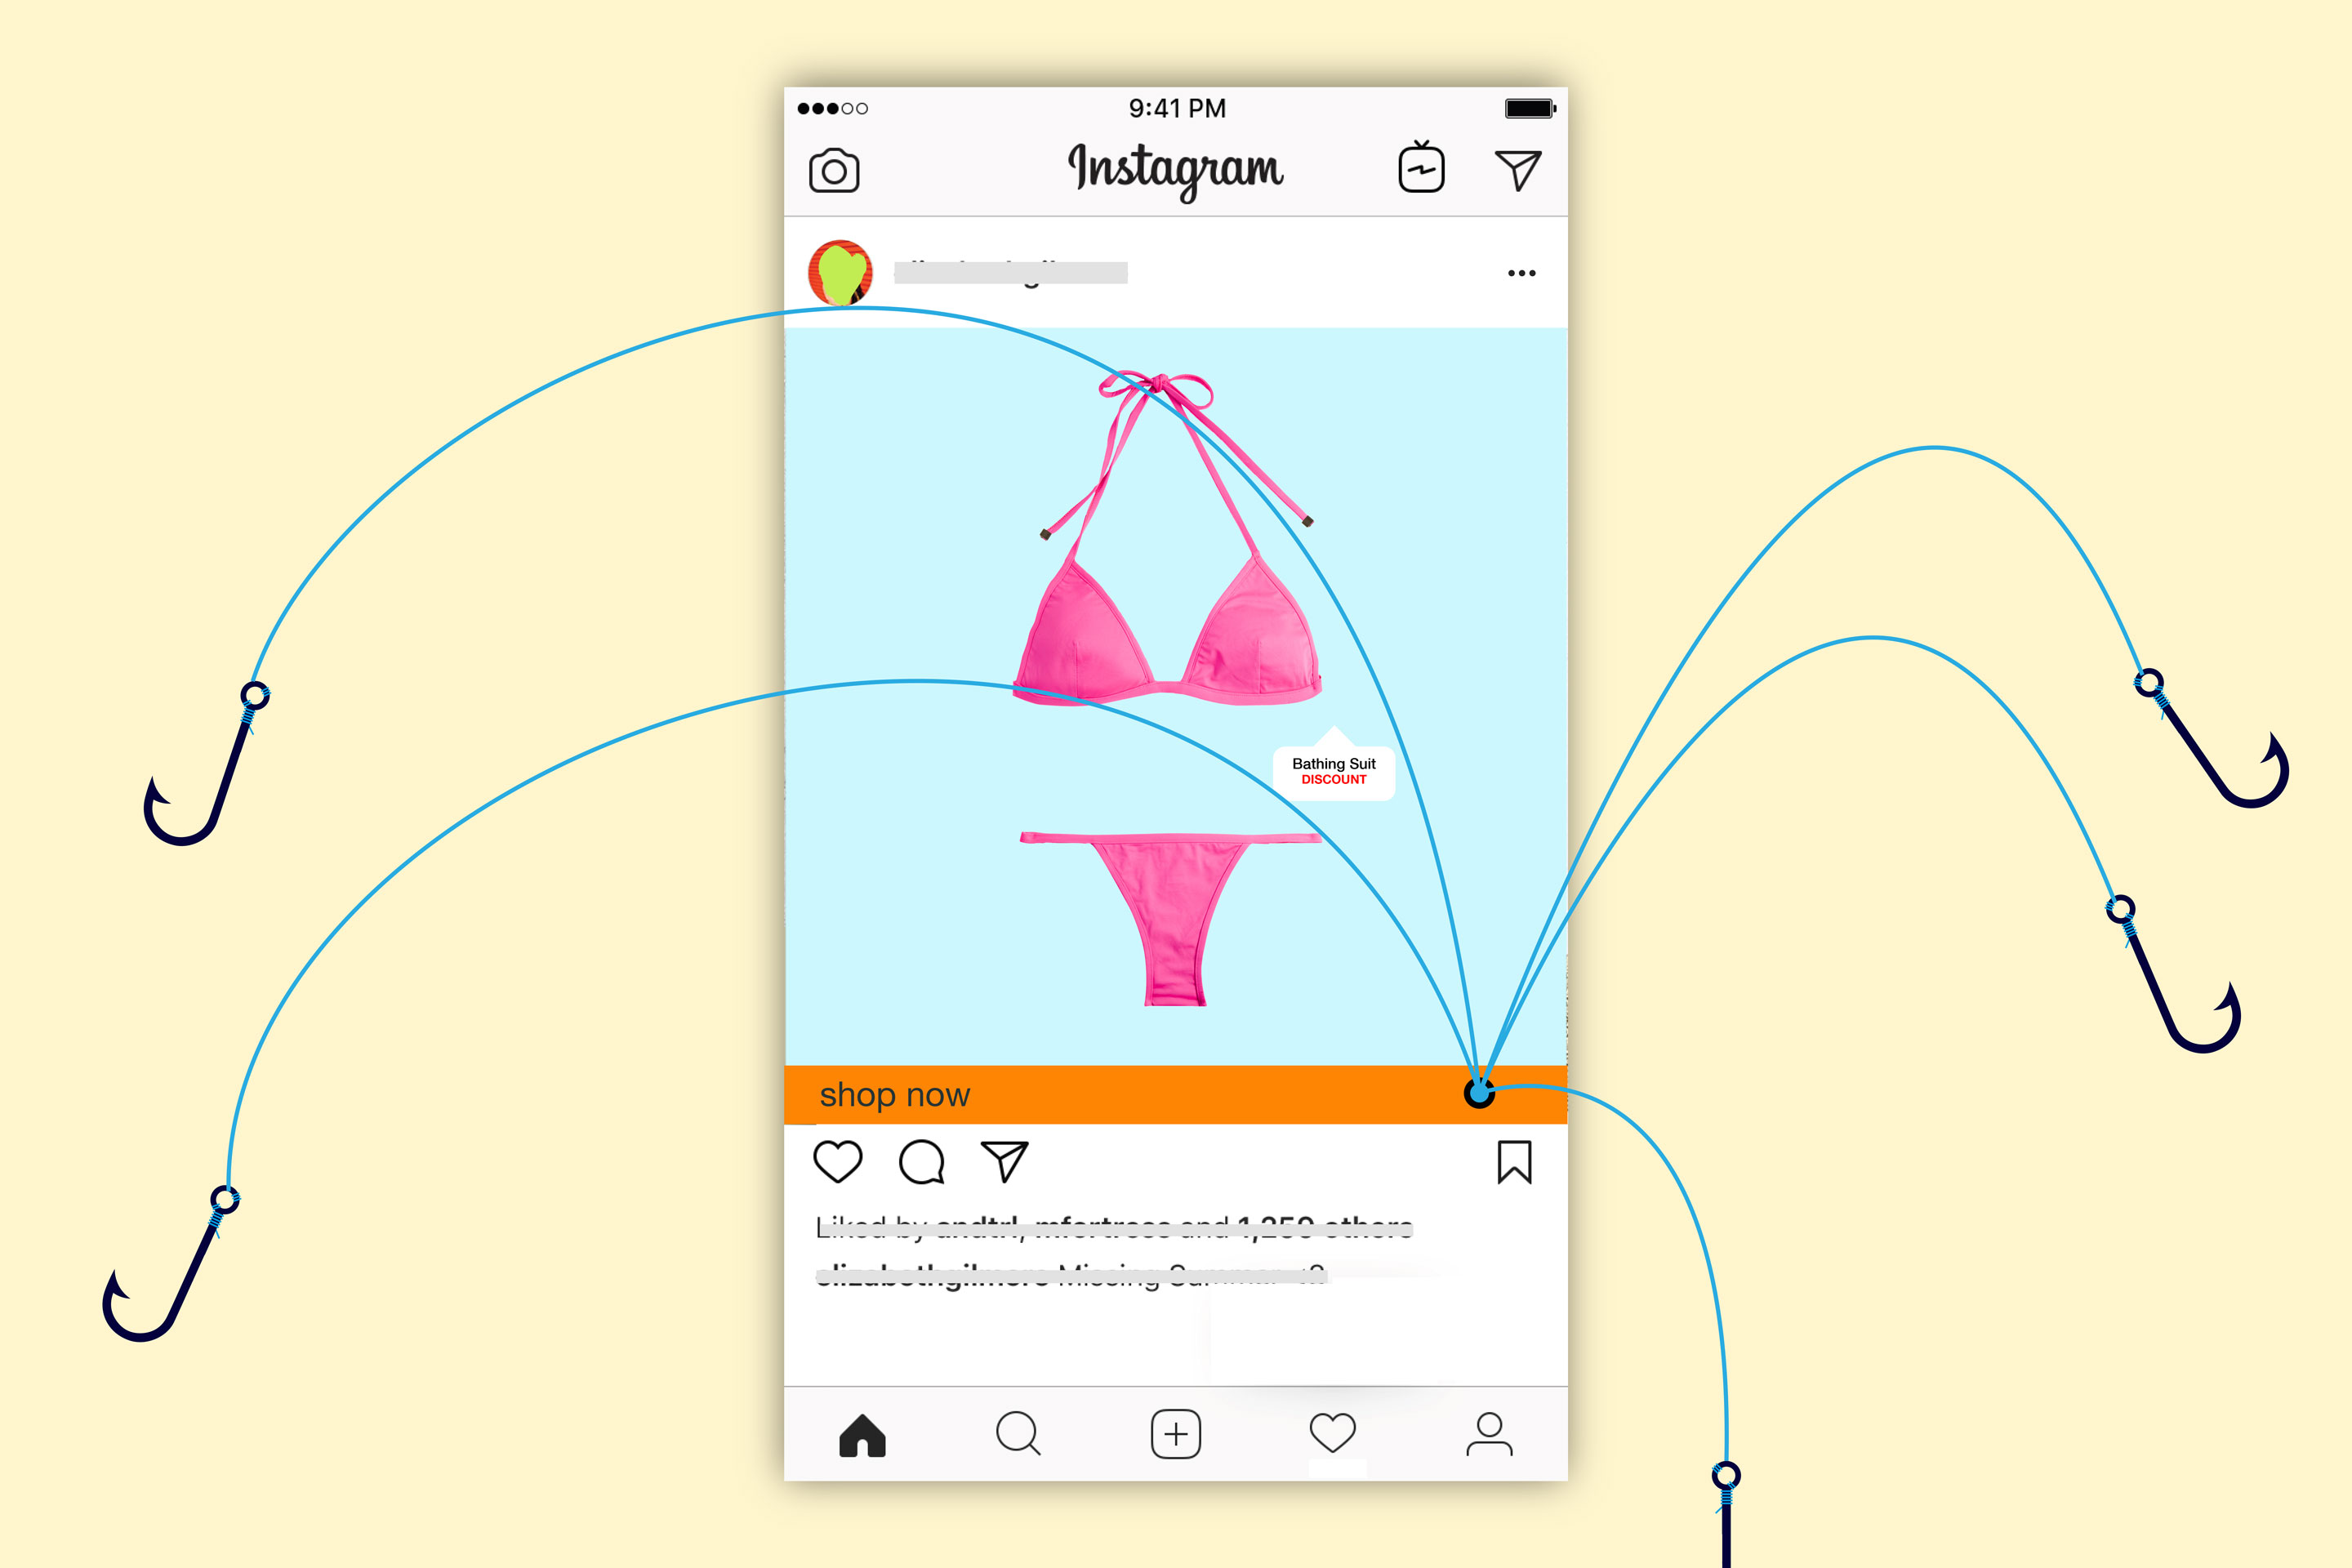 An Instagram Ad Tricked Me Into Overpaying for a Bathing Suit. Here’s How You Can Avoid Being Duped